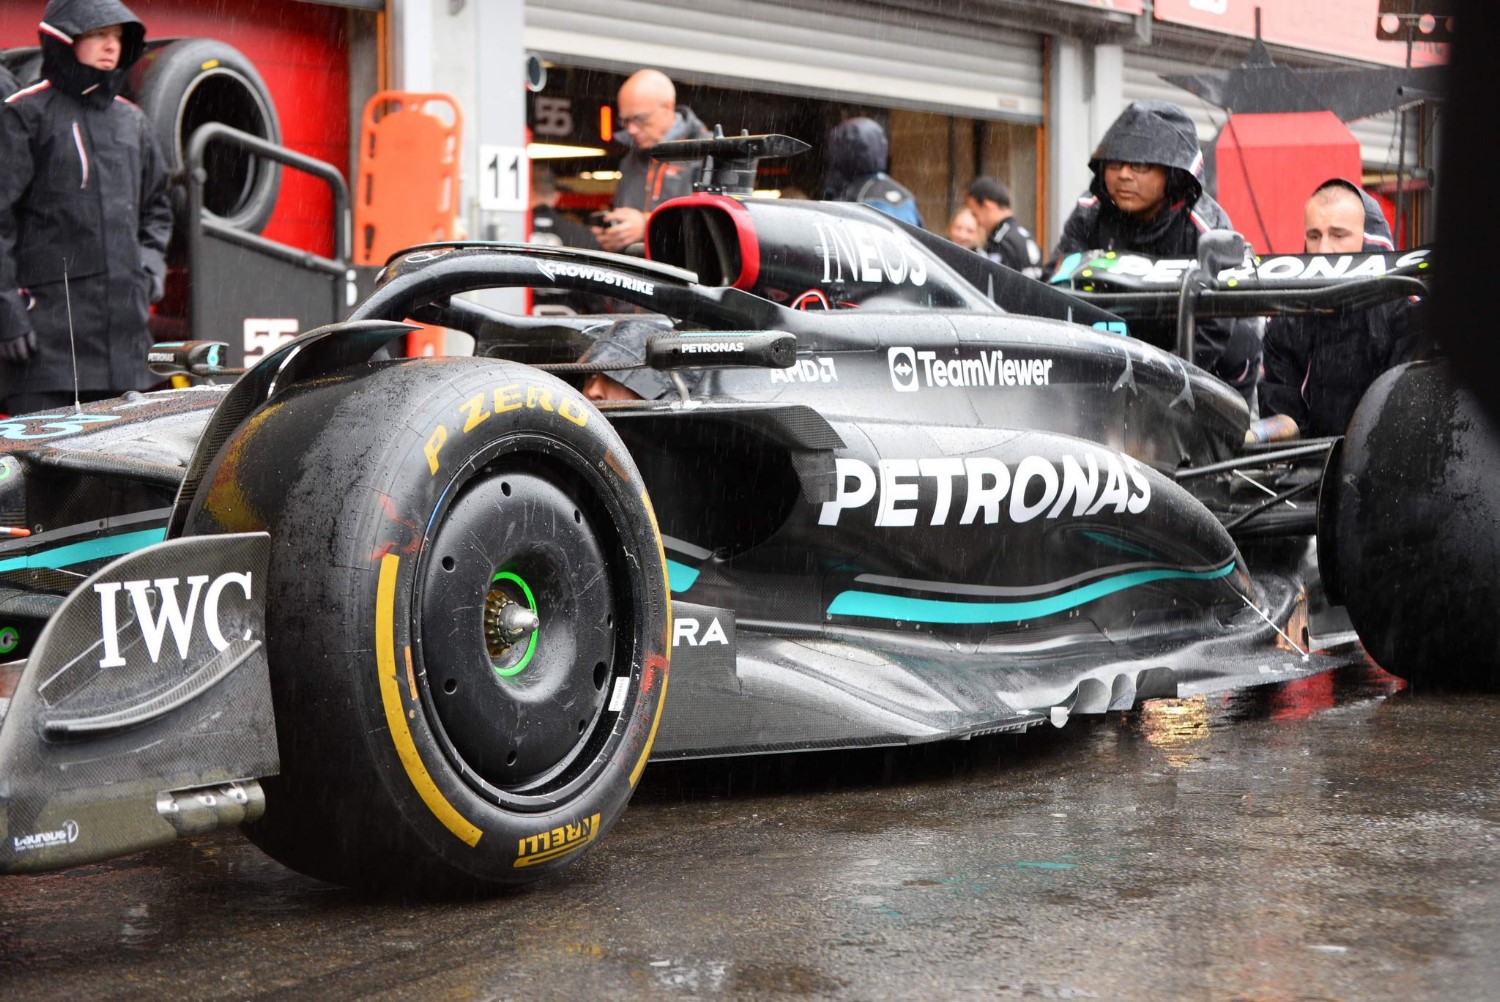 Where is Mercedes hiding the cost to bring all the in-season upgrades that have done.  Here in Spa they are throwing the kitchen sink at the car -new Sidepods, Engine Cover, Floor, and Rear Wing. Many think they are cheating with their cost accounting.